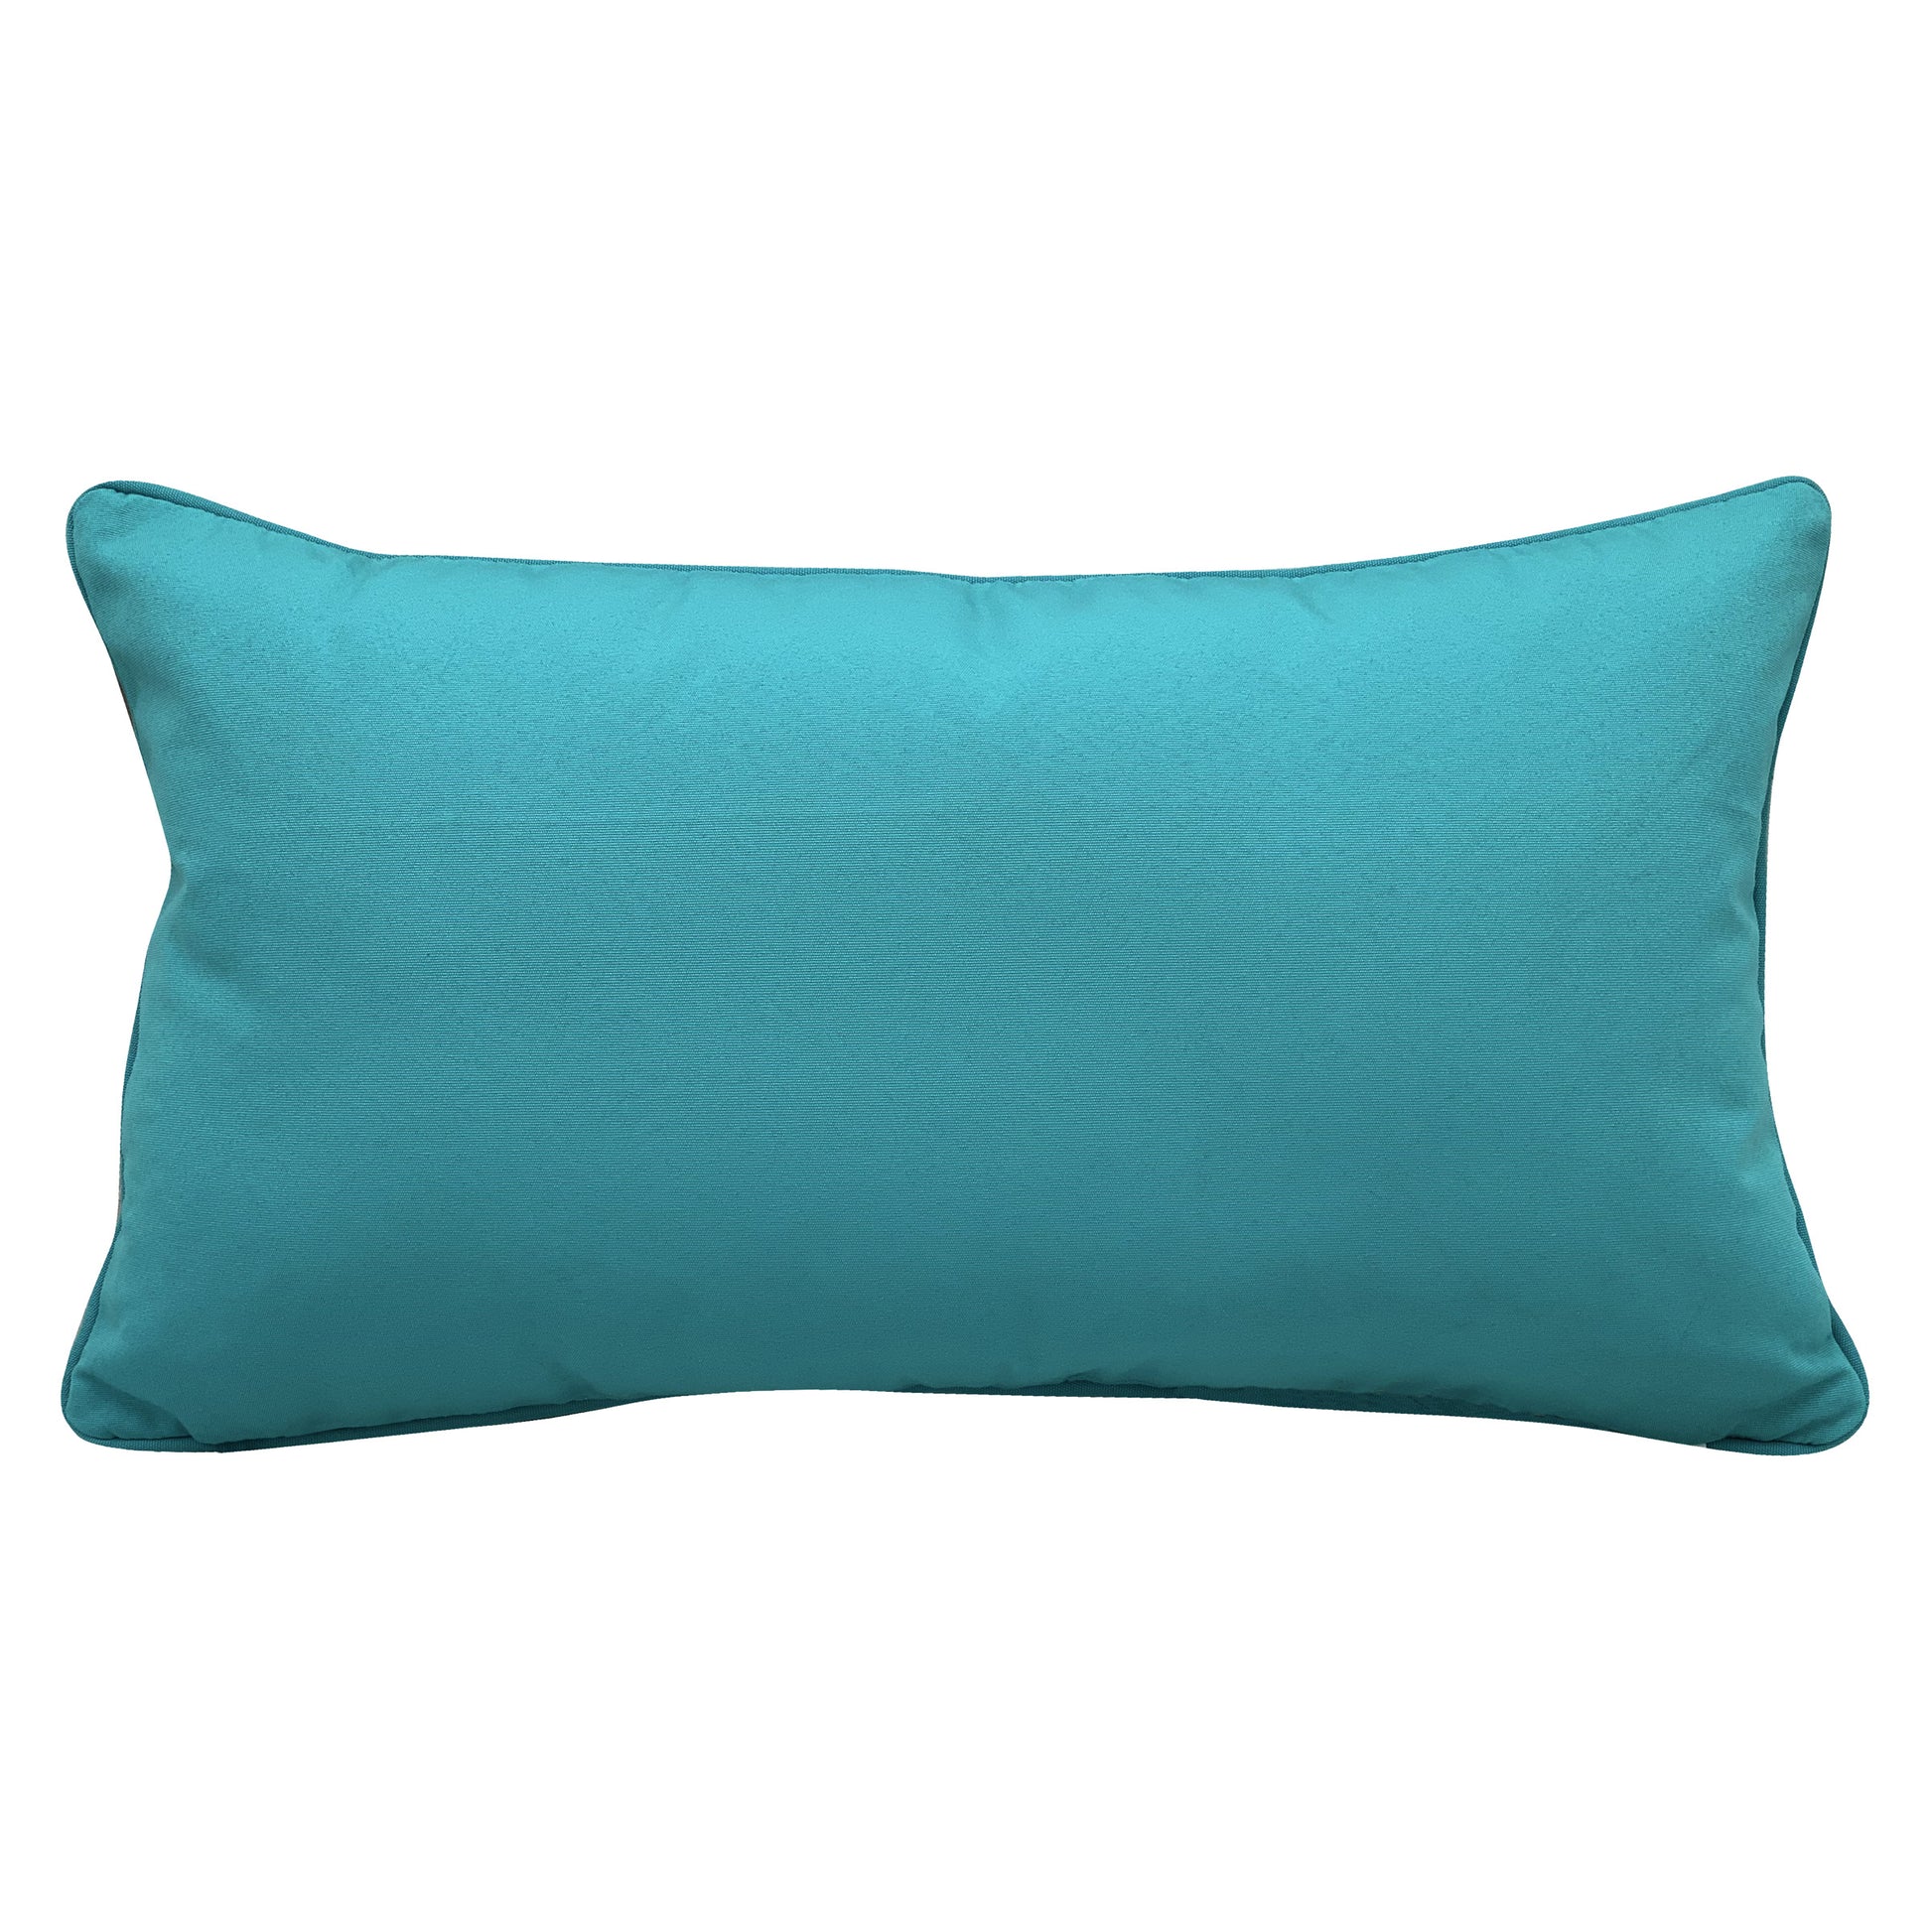 Solid blue fabric; back side of the Coral Waves and Fish Indoor Outdoor Pillow